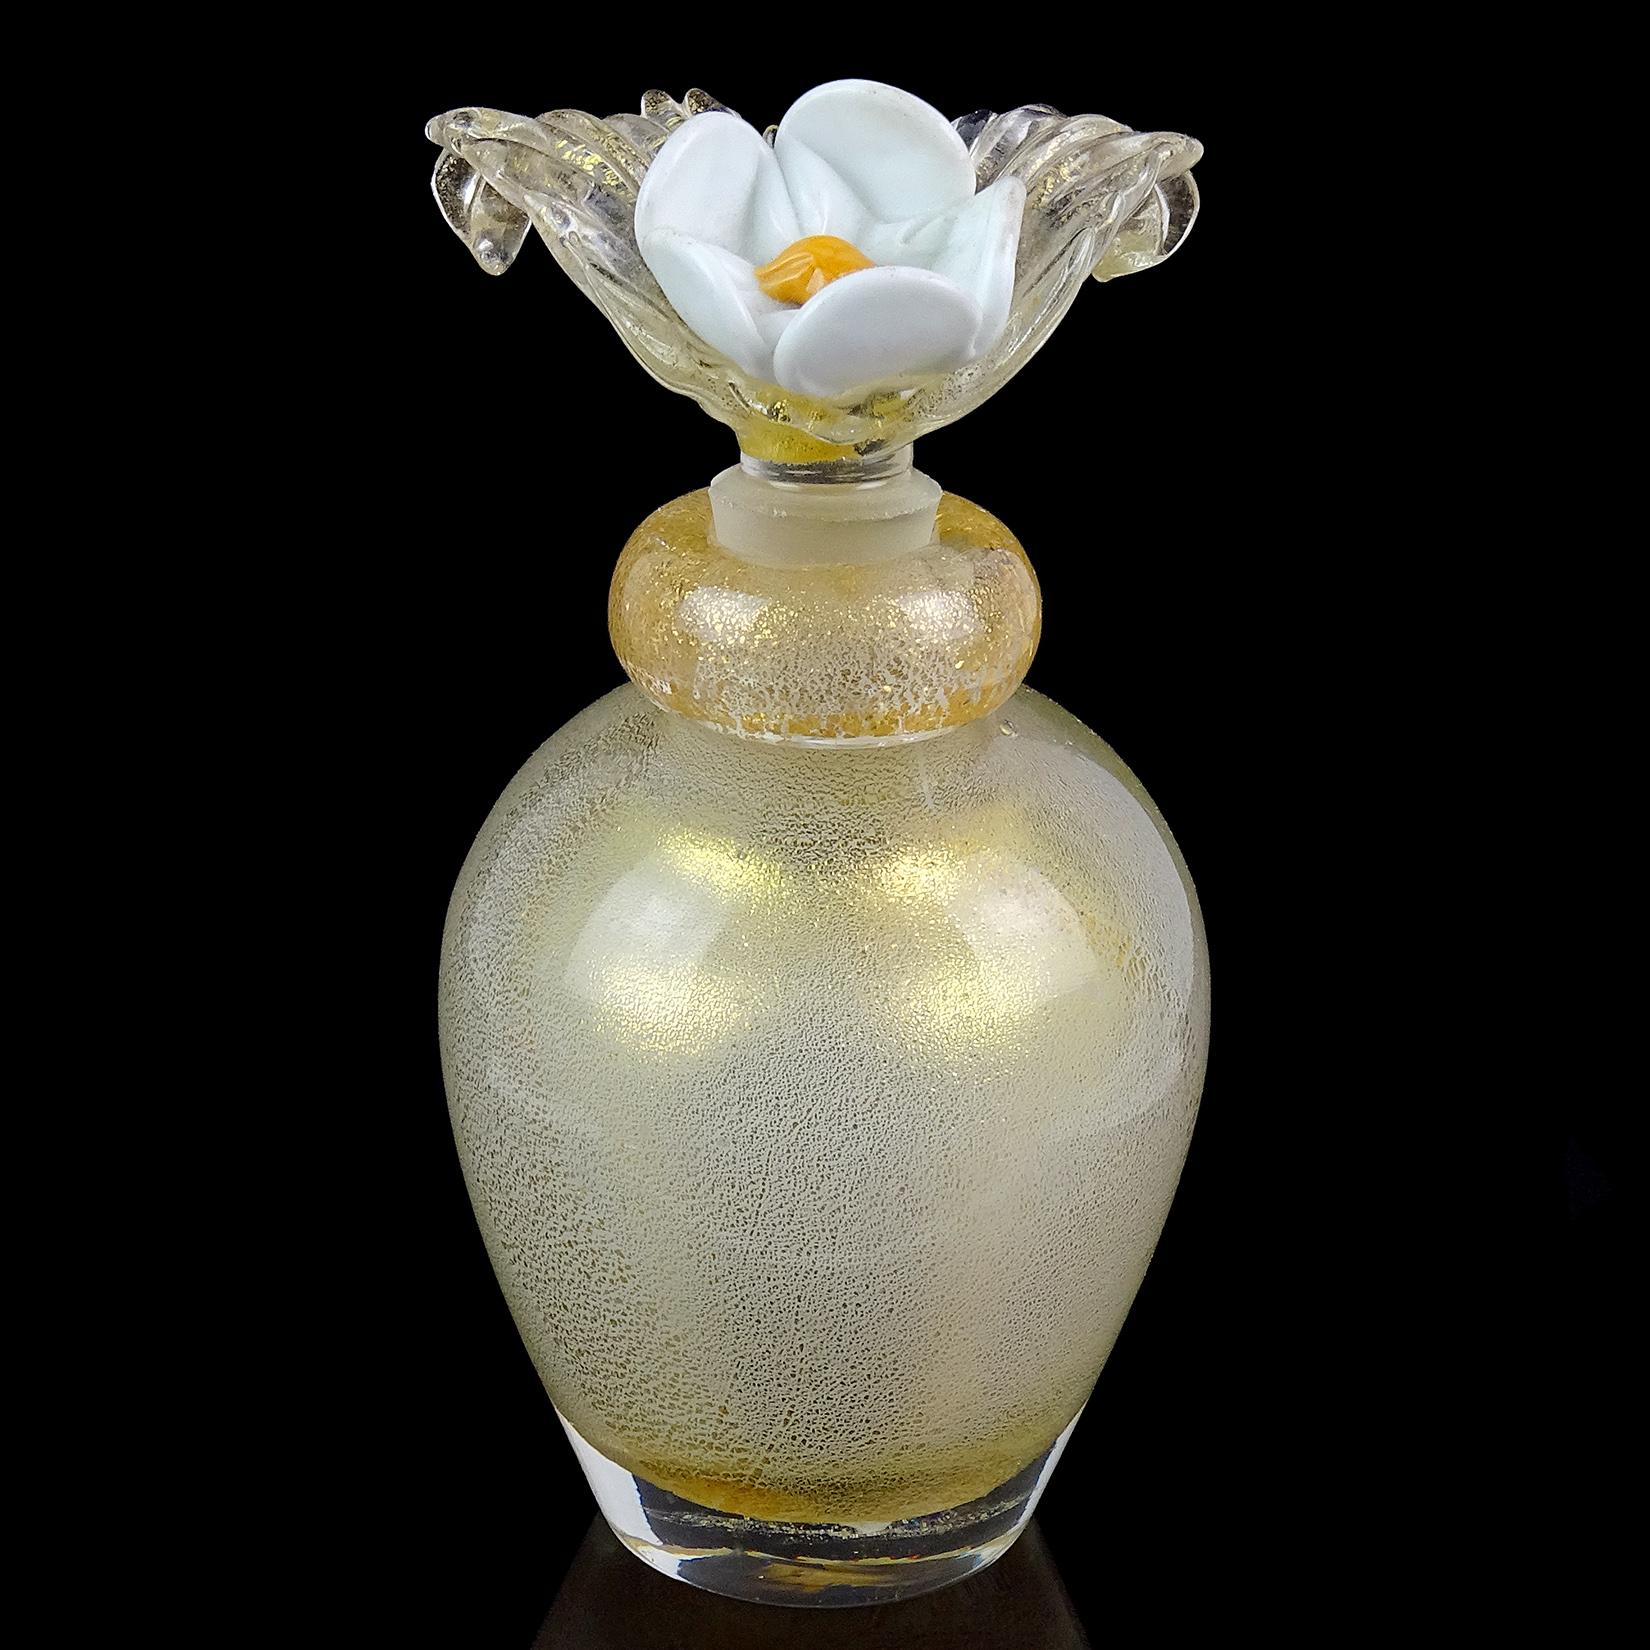 Gorgeous vintage Murano hand blown gold flecks over white Italian art glass perfume bottle. Attributed to designer Archimede Seguso. The bottle has a beautiful large flower stopper, in white with bright orange center and clear leafs with gold. The